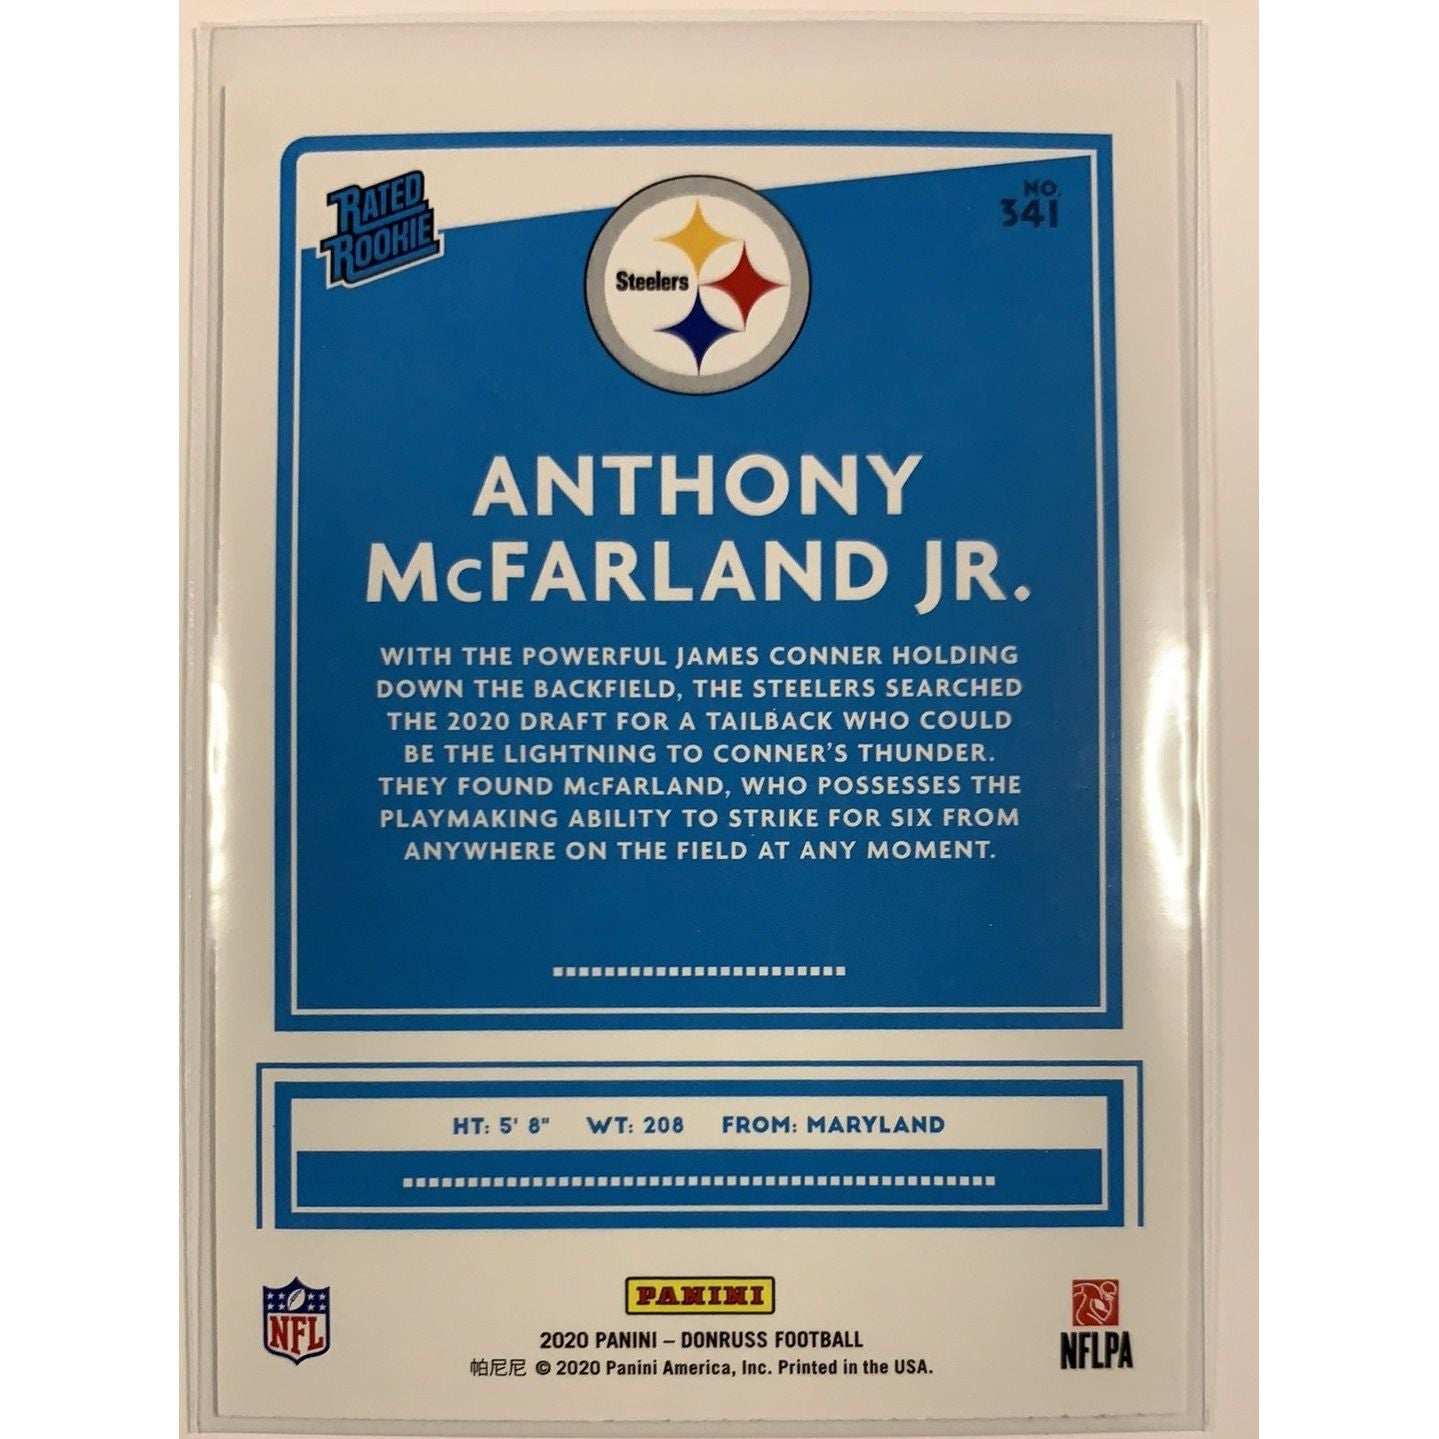  2020 Donruss Anthony McFarland Jr. Rated Rookie  Local Legends Cards & Collectibles